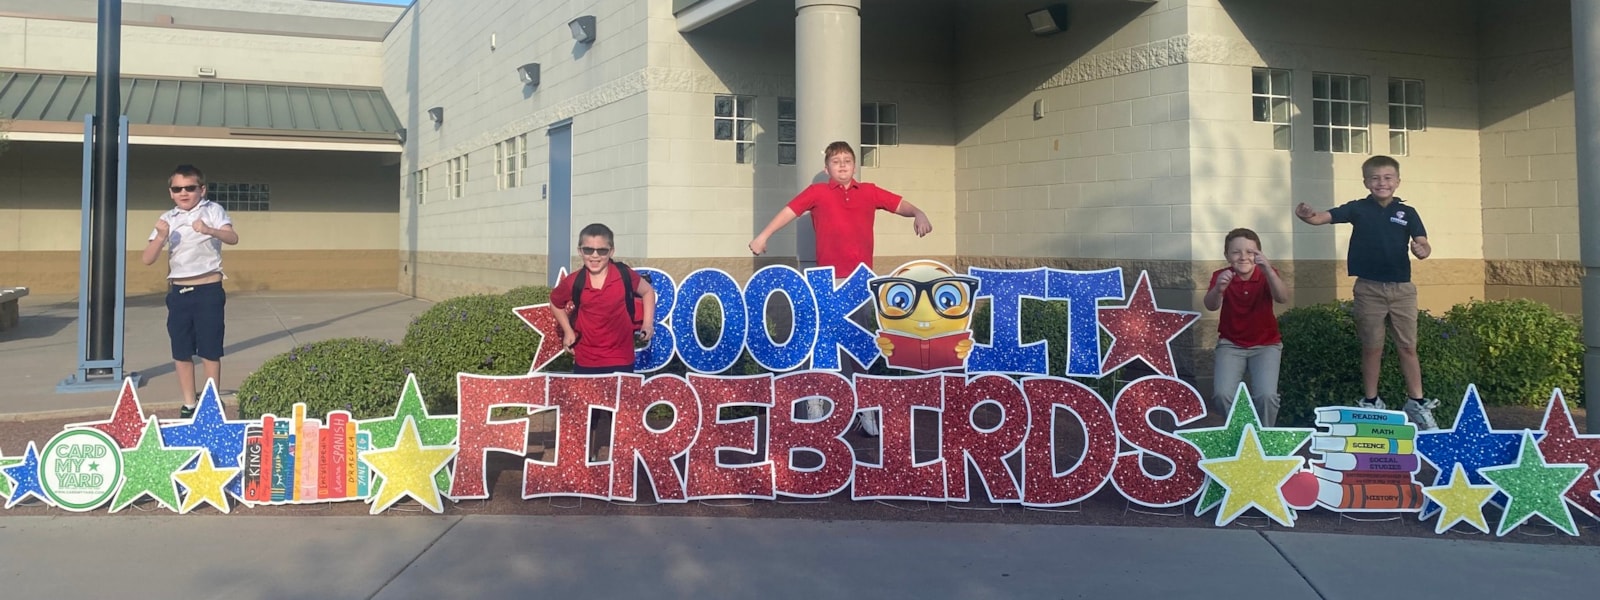 Students standing by a sign that says Book It Firebirds 